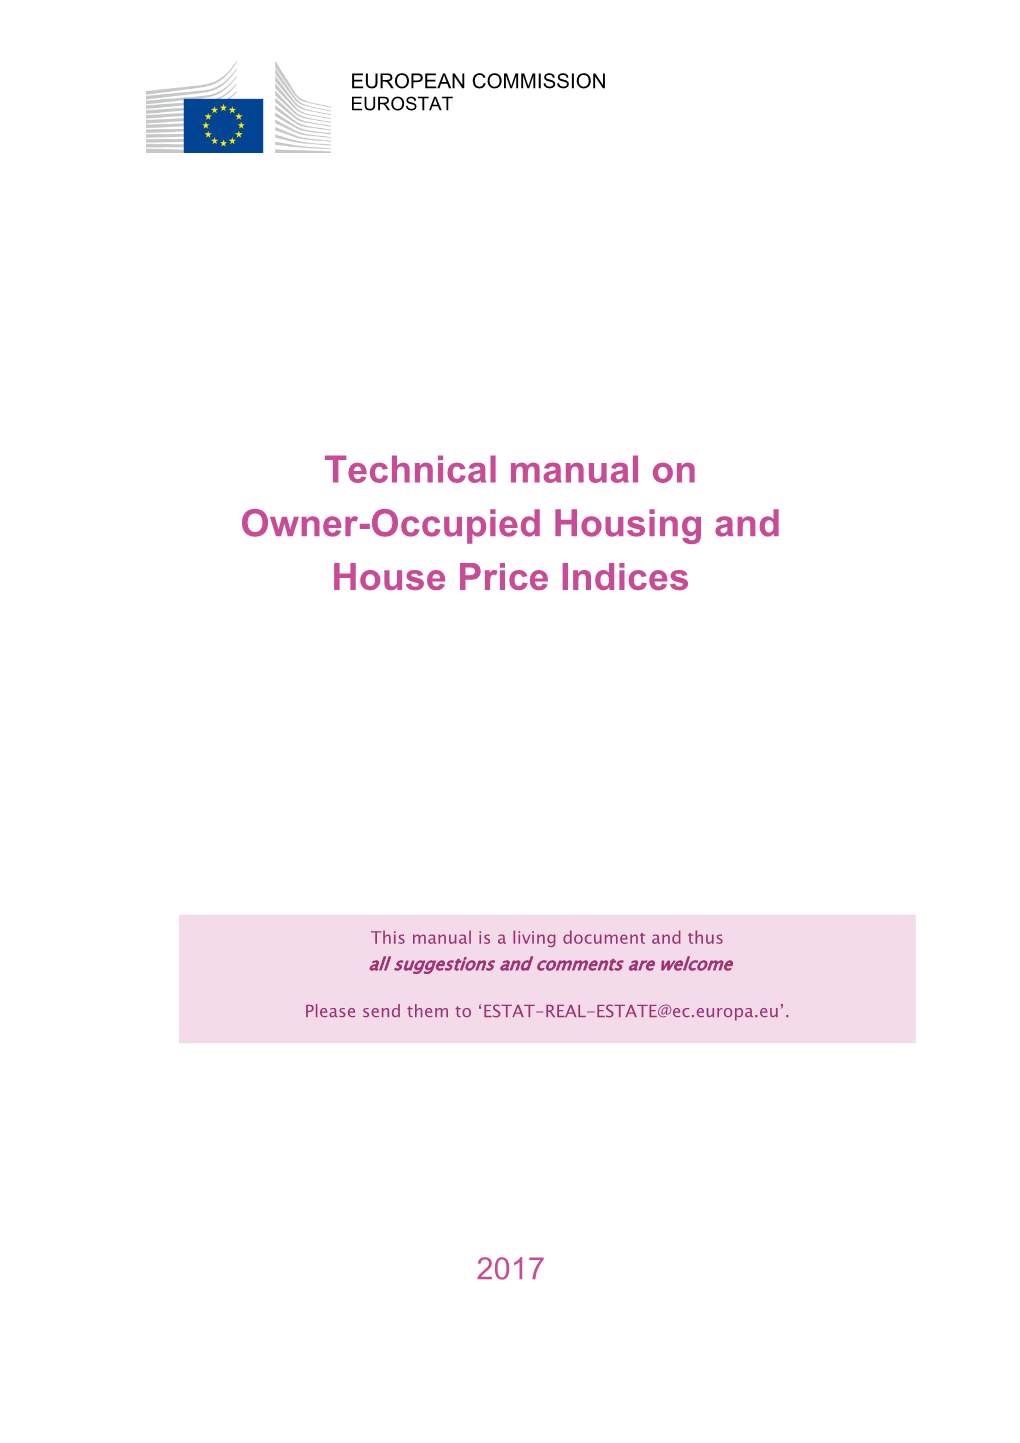 Technical Manual on Owner-Occupied Housing and House Price Indices